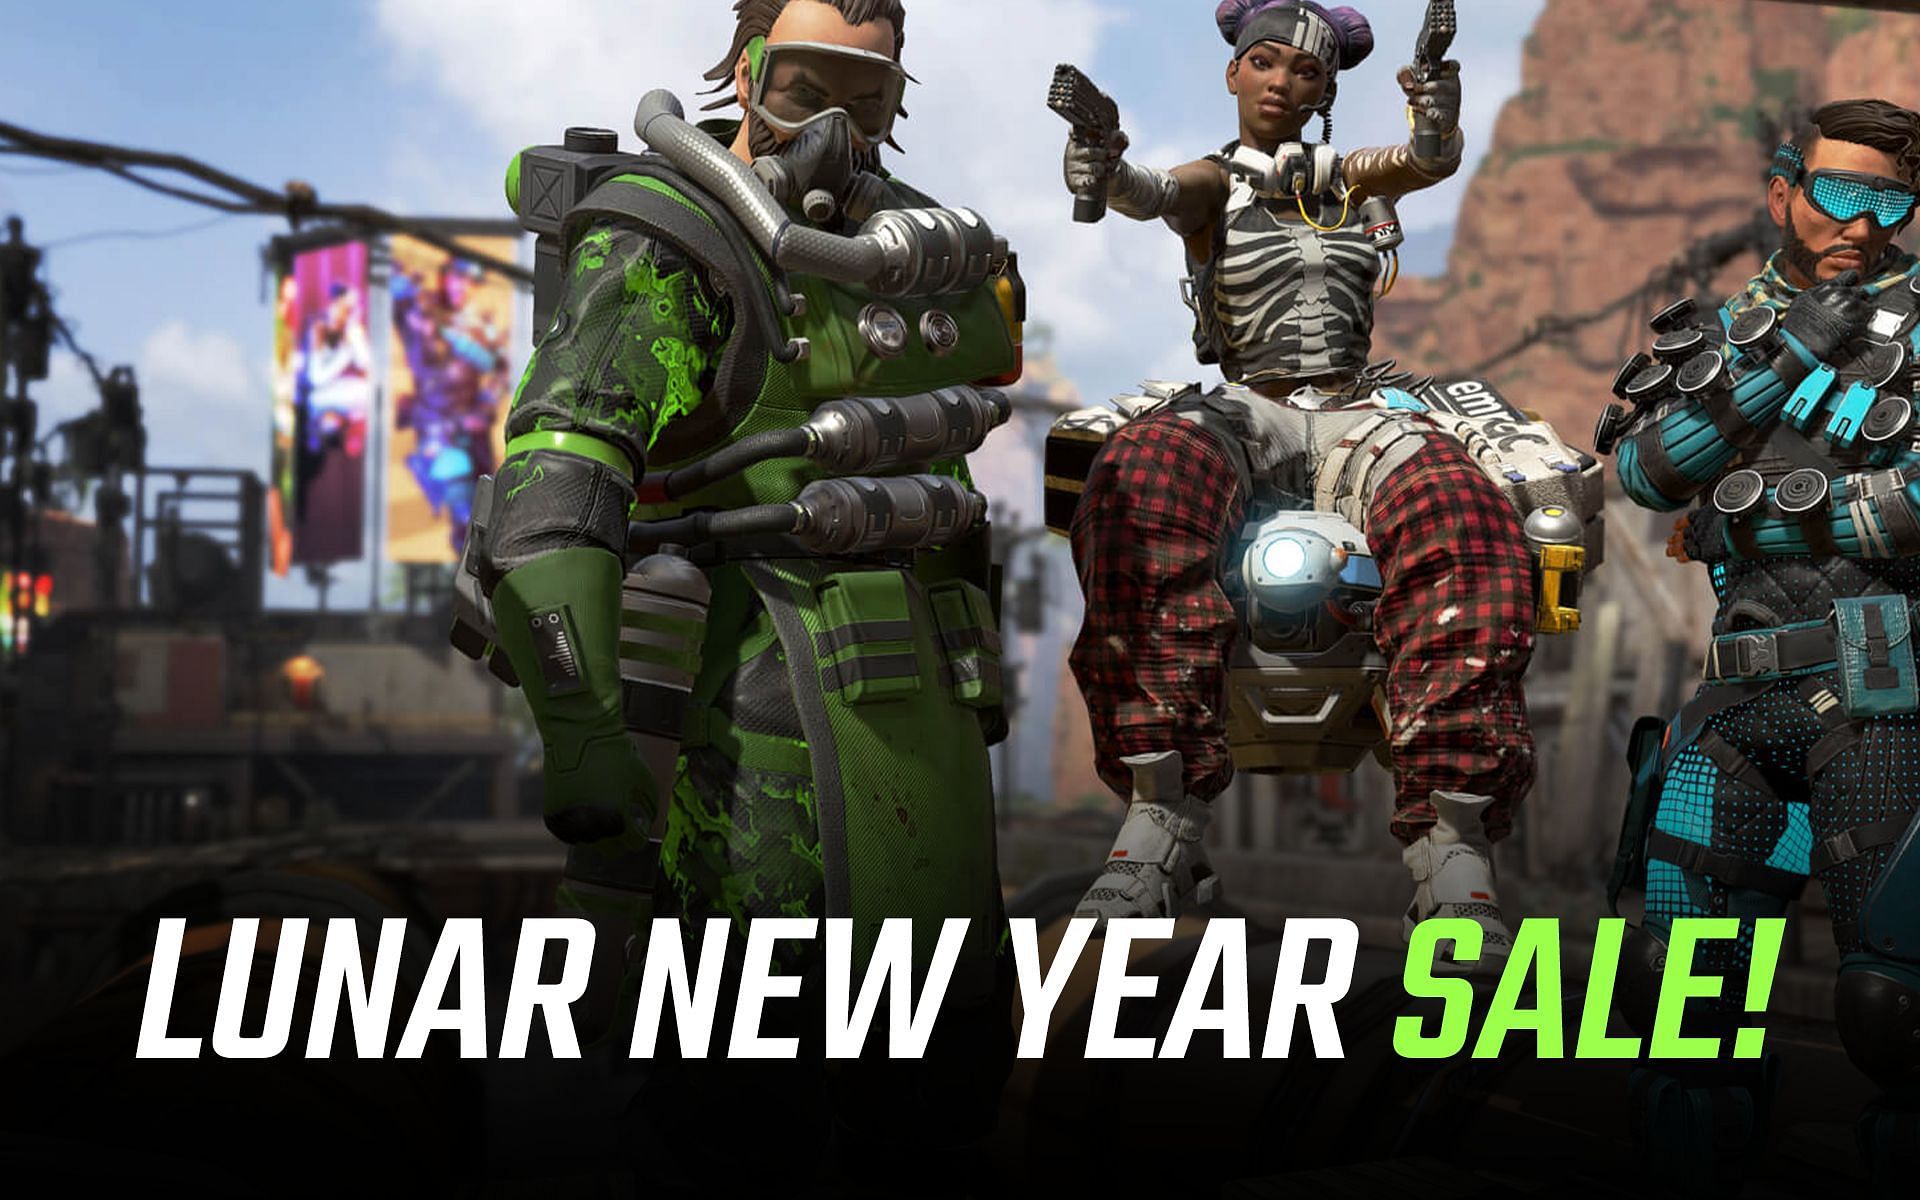 Apex Legends is reportedly set to offer bundles for the Lunar New Year Sale (Image via Sportskeeda)